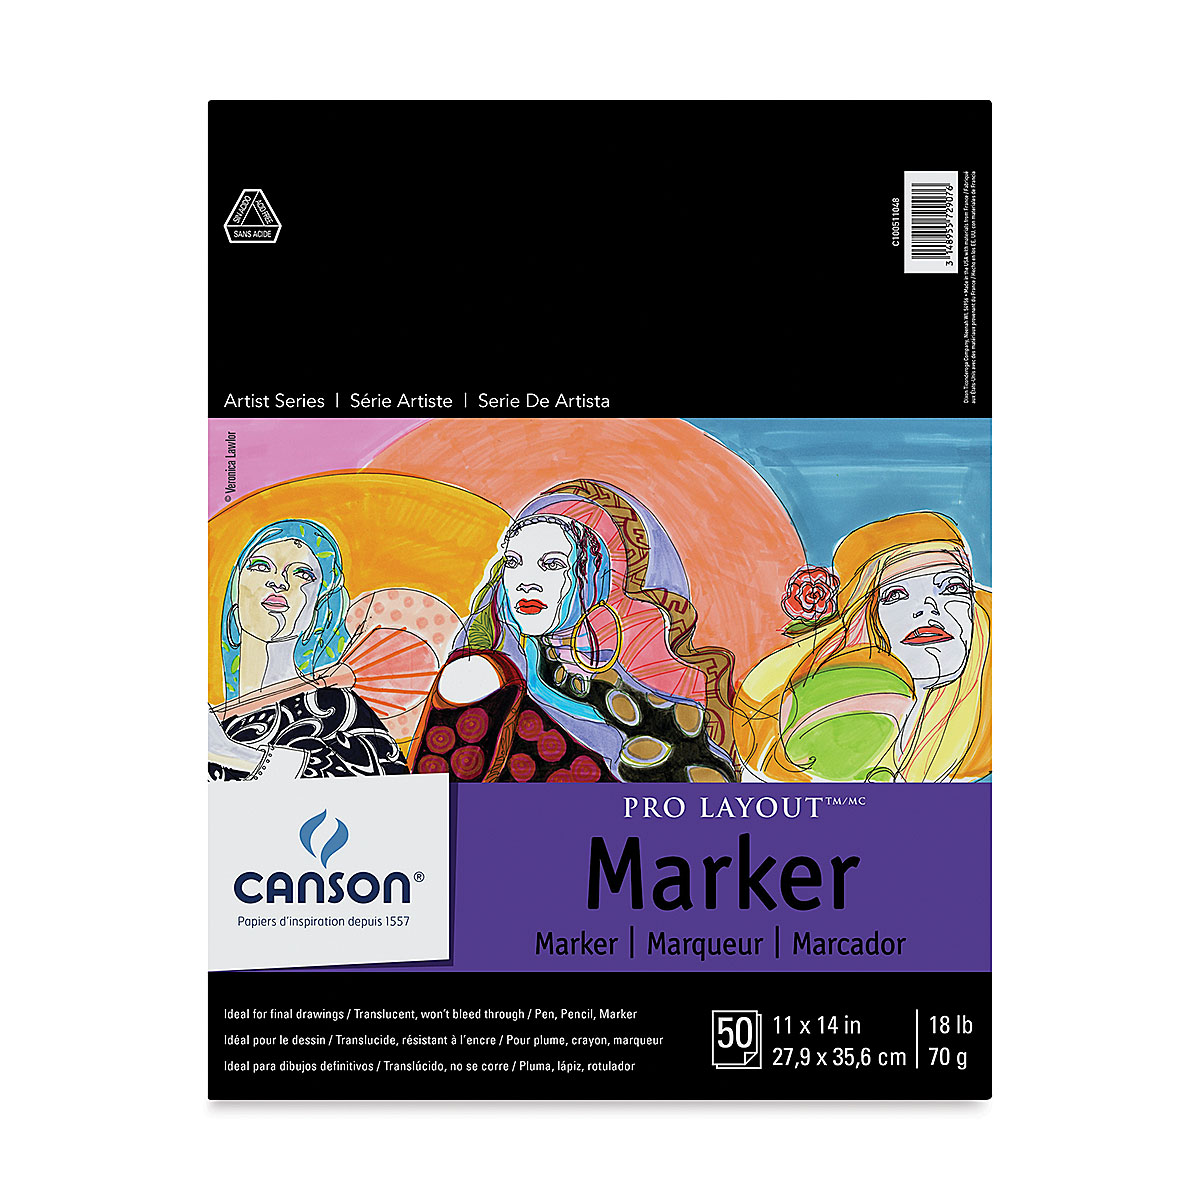 Canson XL Marker Pad A3